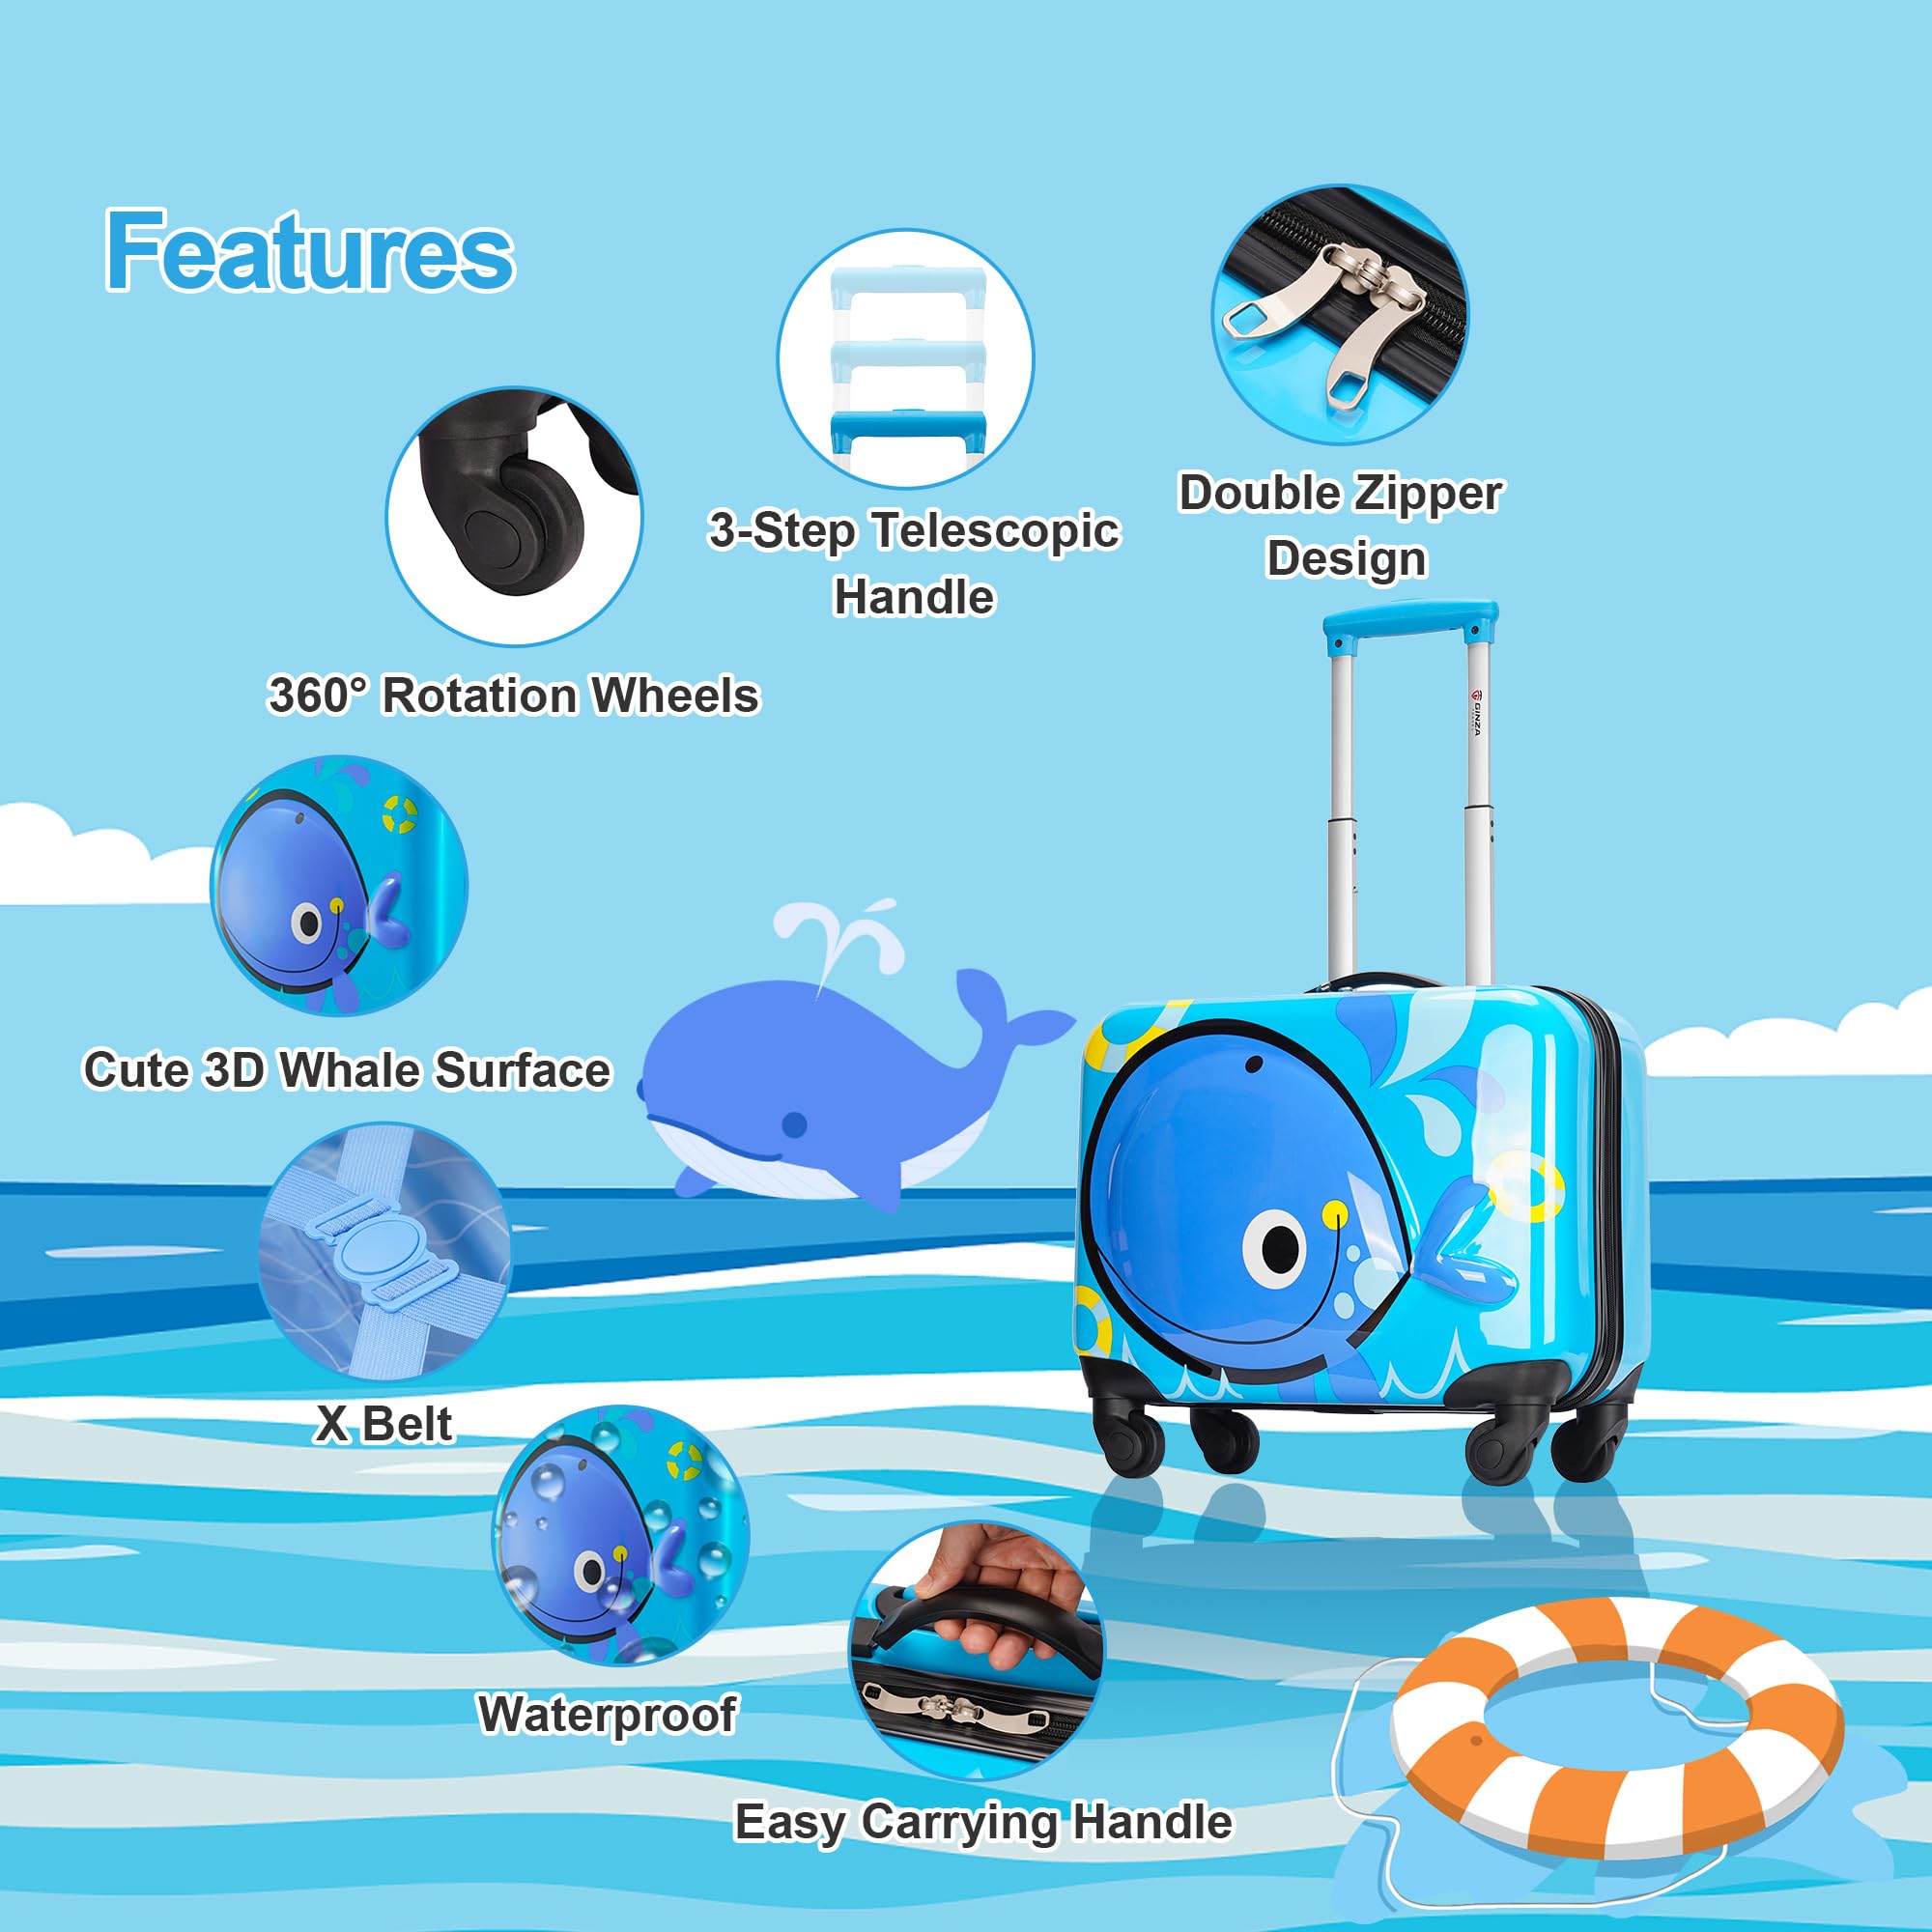 GinzaTravel 3D Little Whale Cute Children's Luggage Sit and Ride Trolley Case 18-inch Universal Wheel Travel Case for Boys and Girls